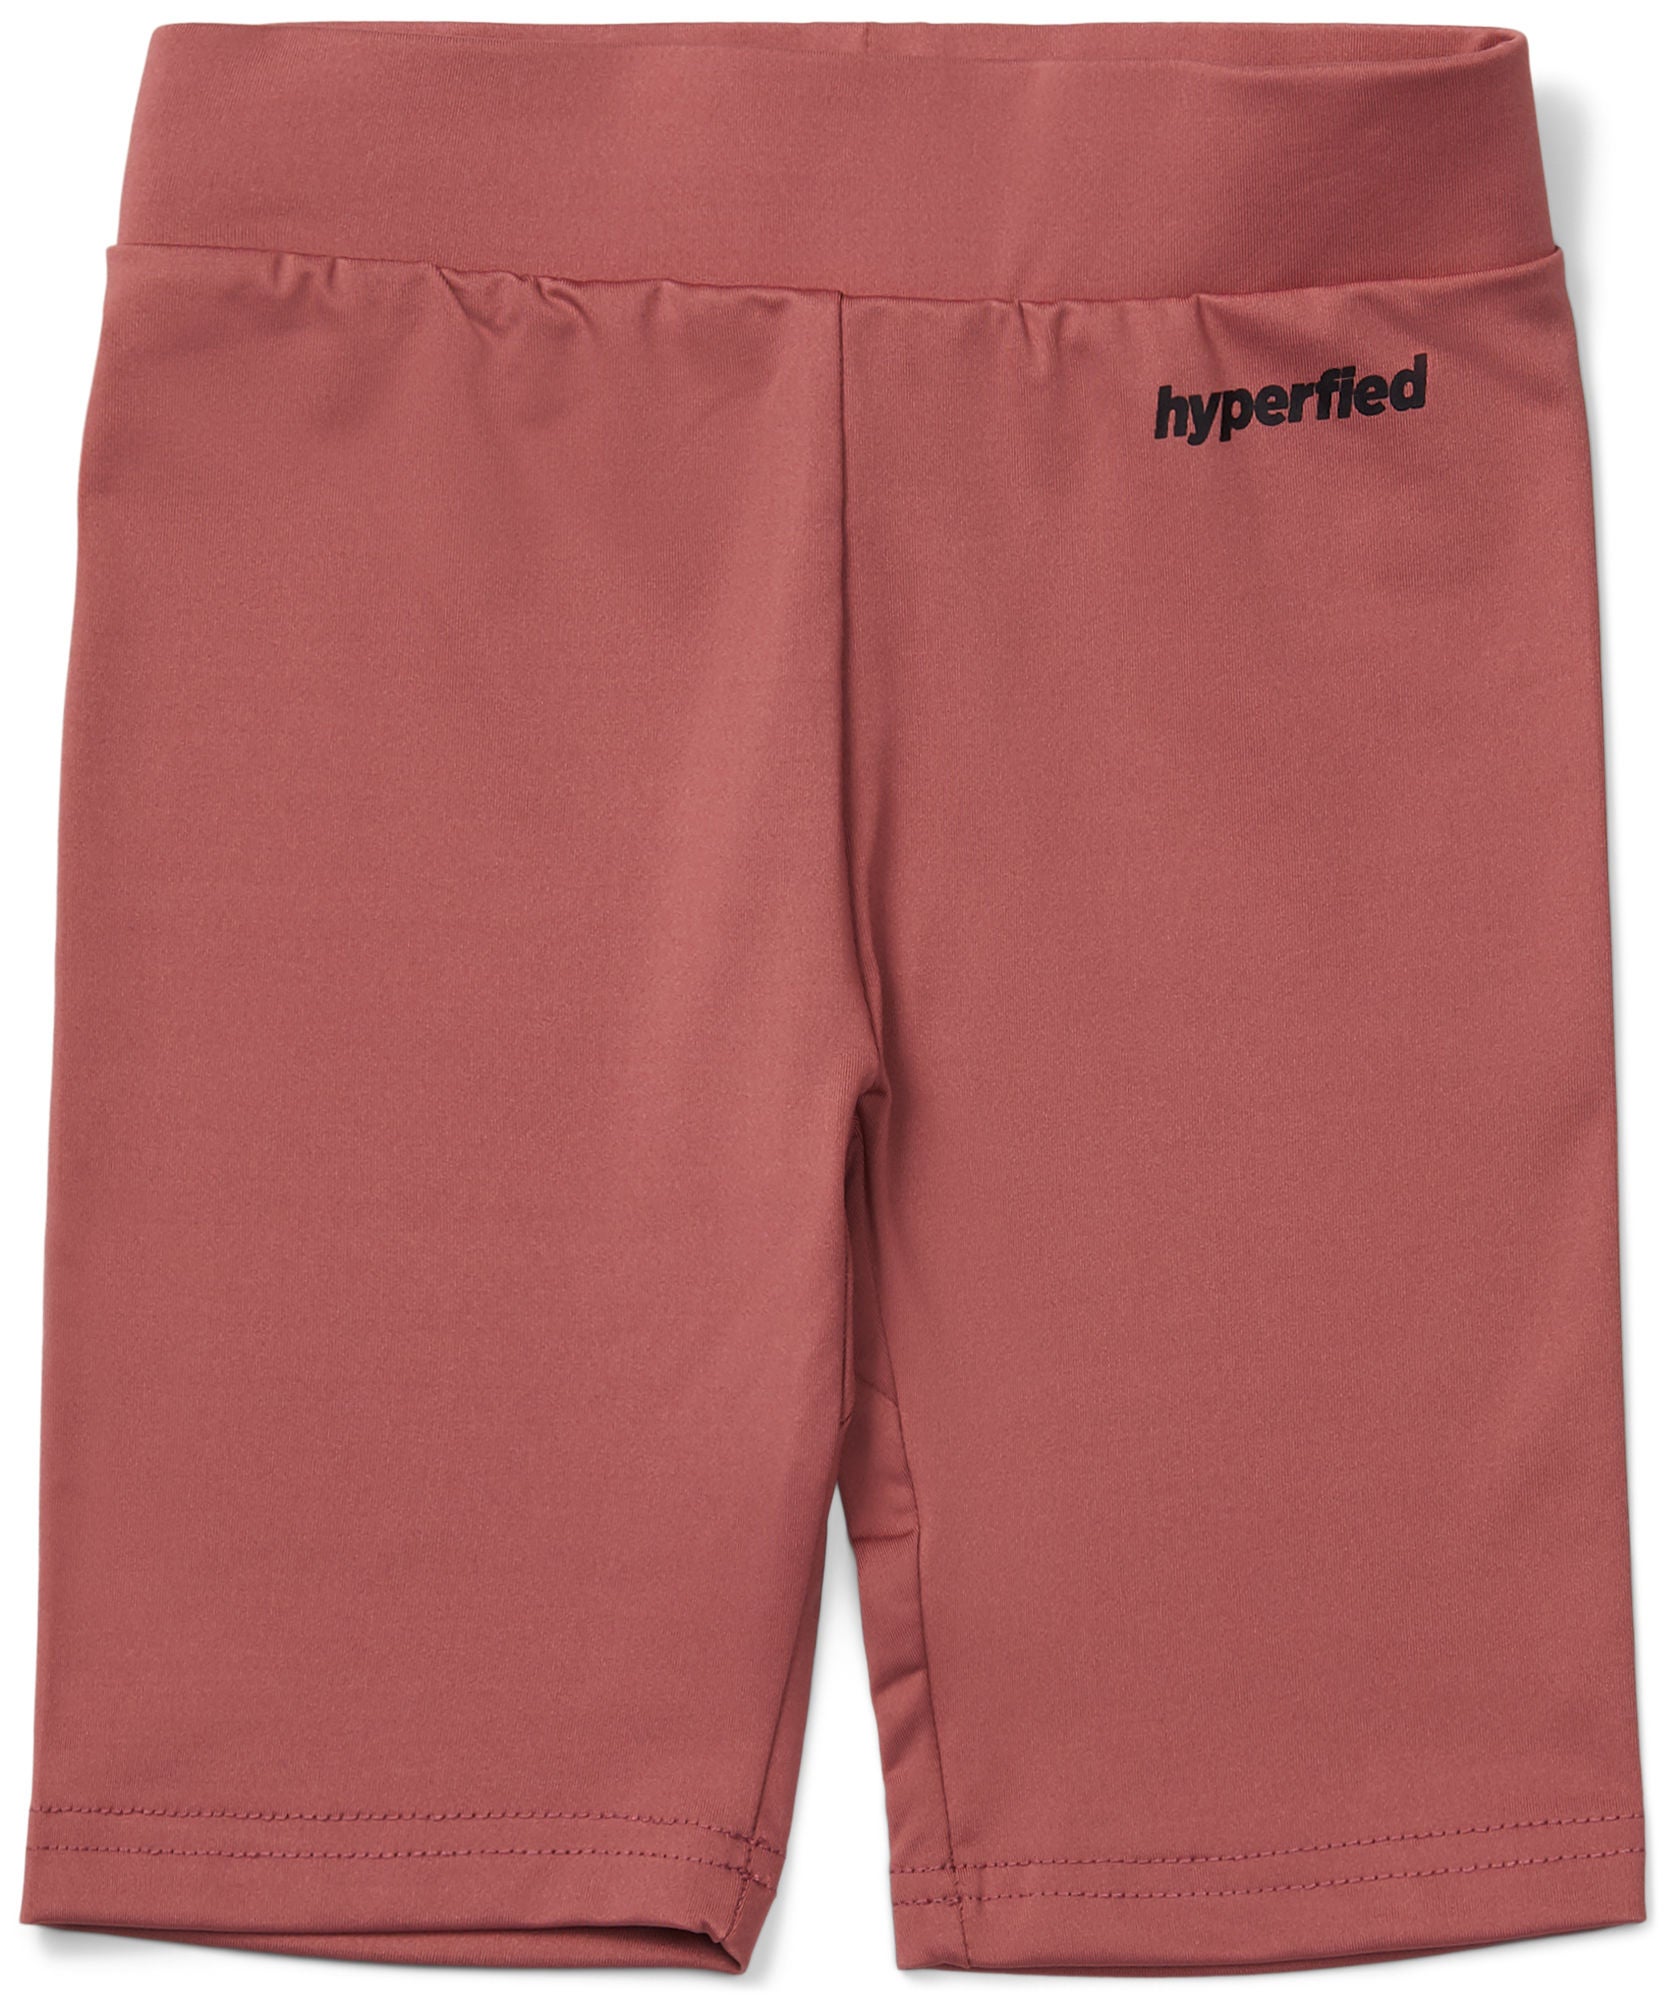 Hyperfied Biker Shorts|Withered Rose 86-92